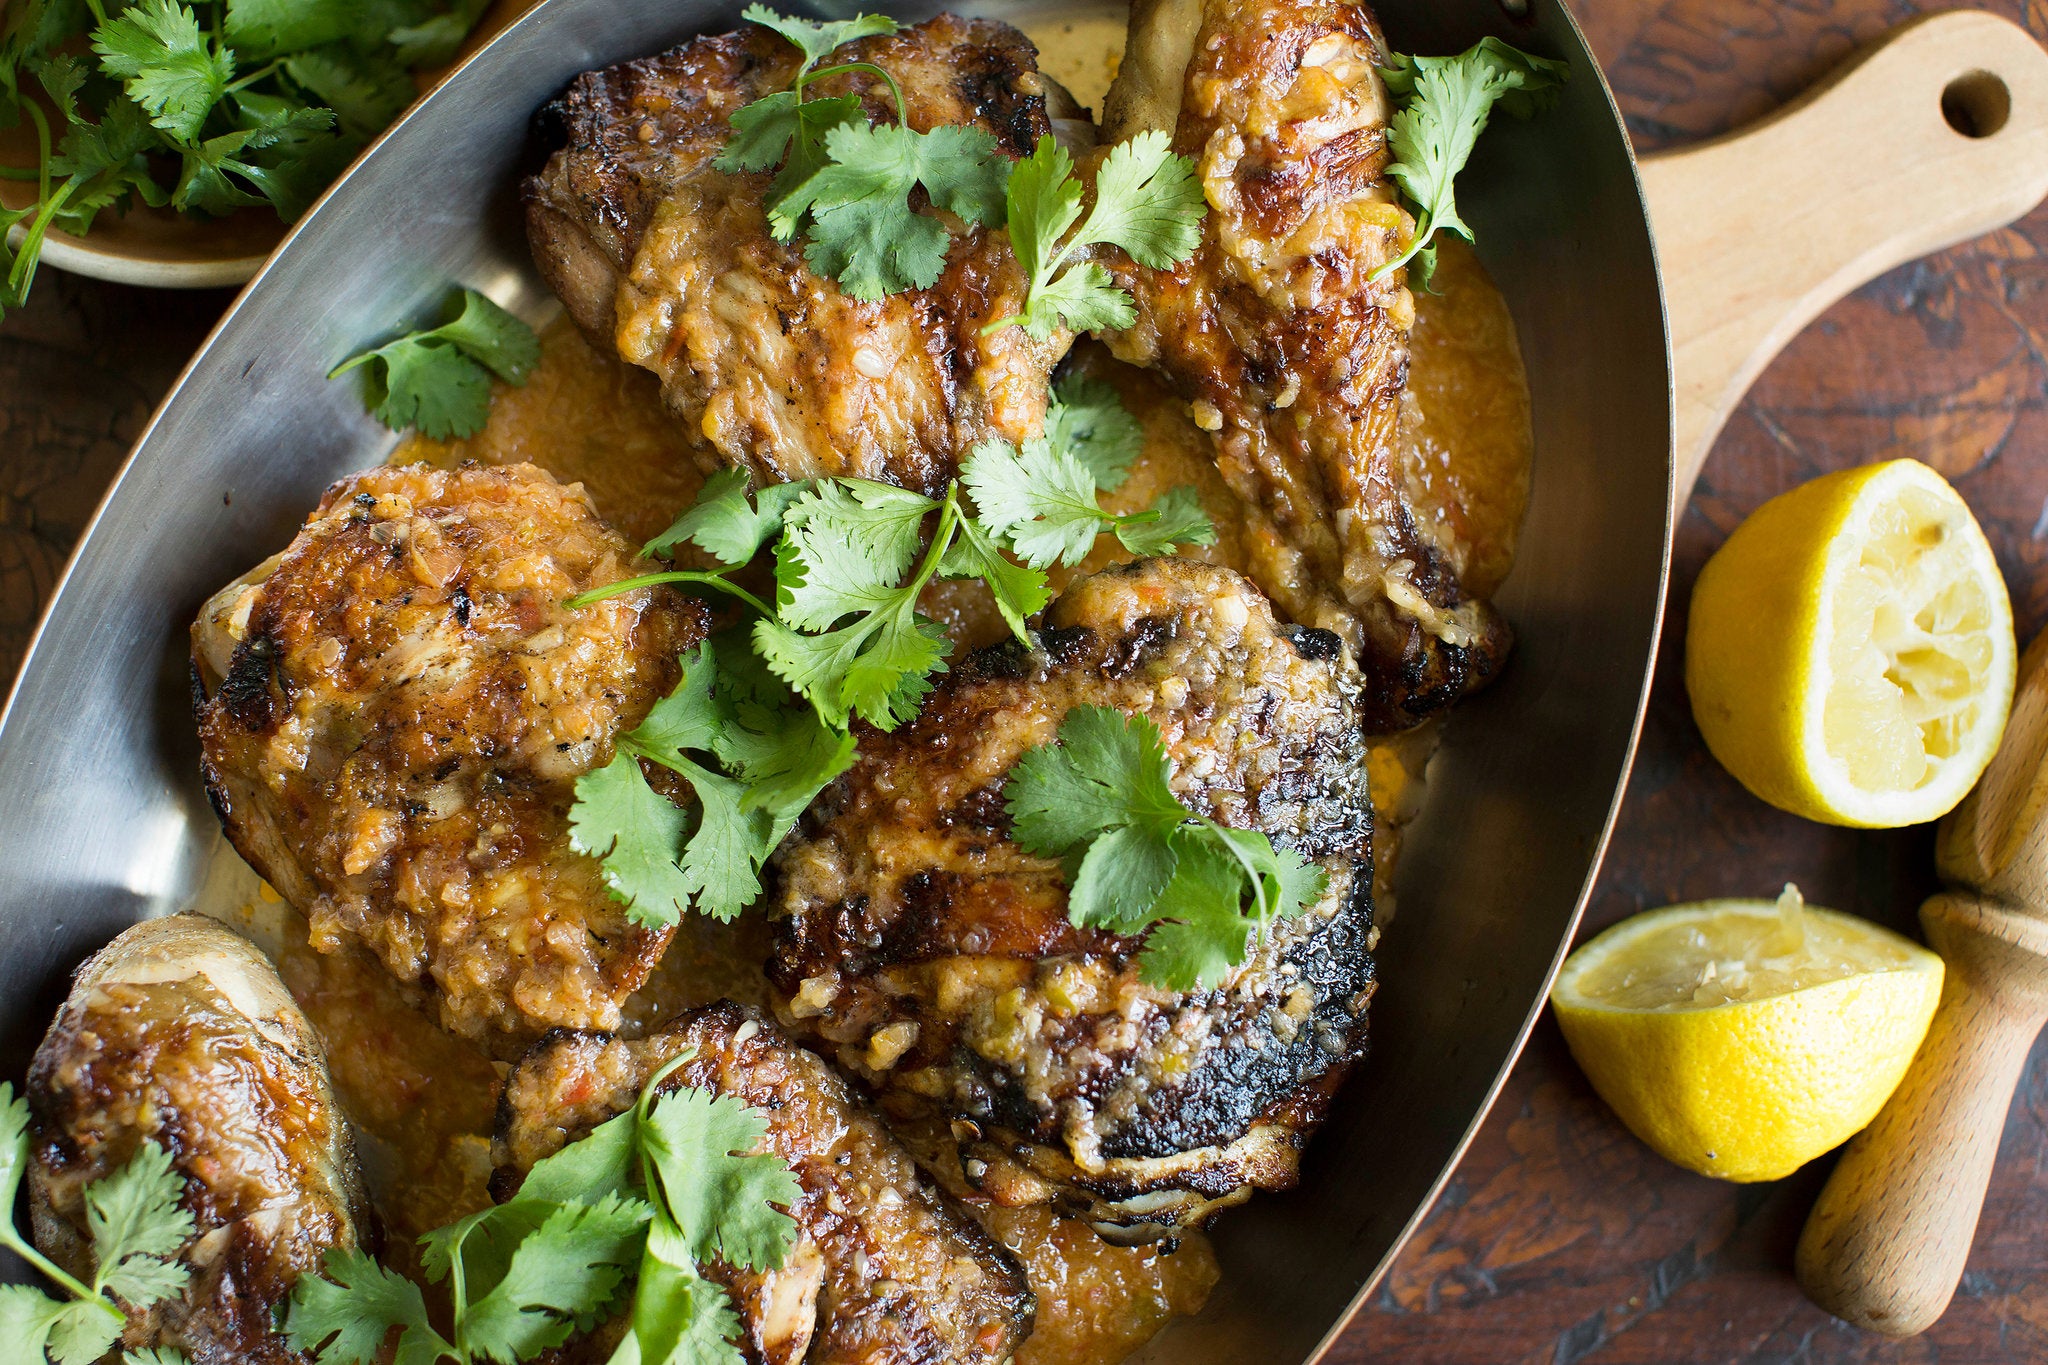 This coconut-chicken dish has its roots in the city of Mombasa